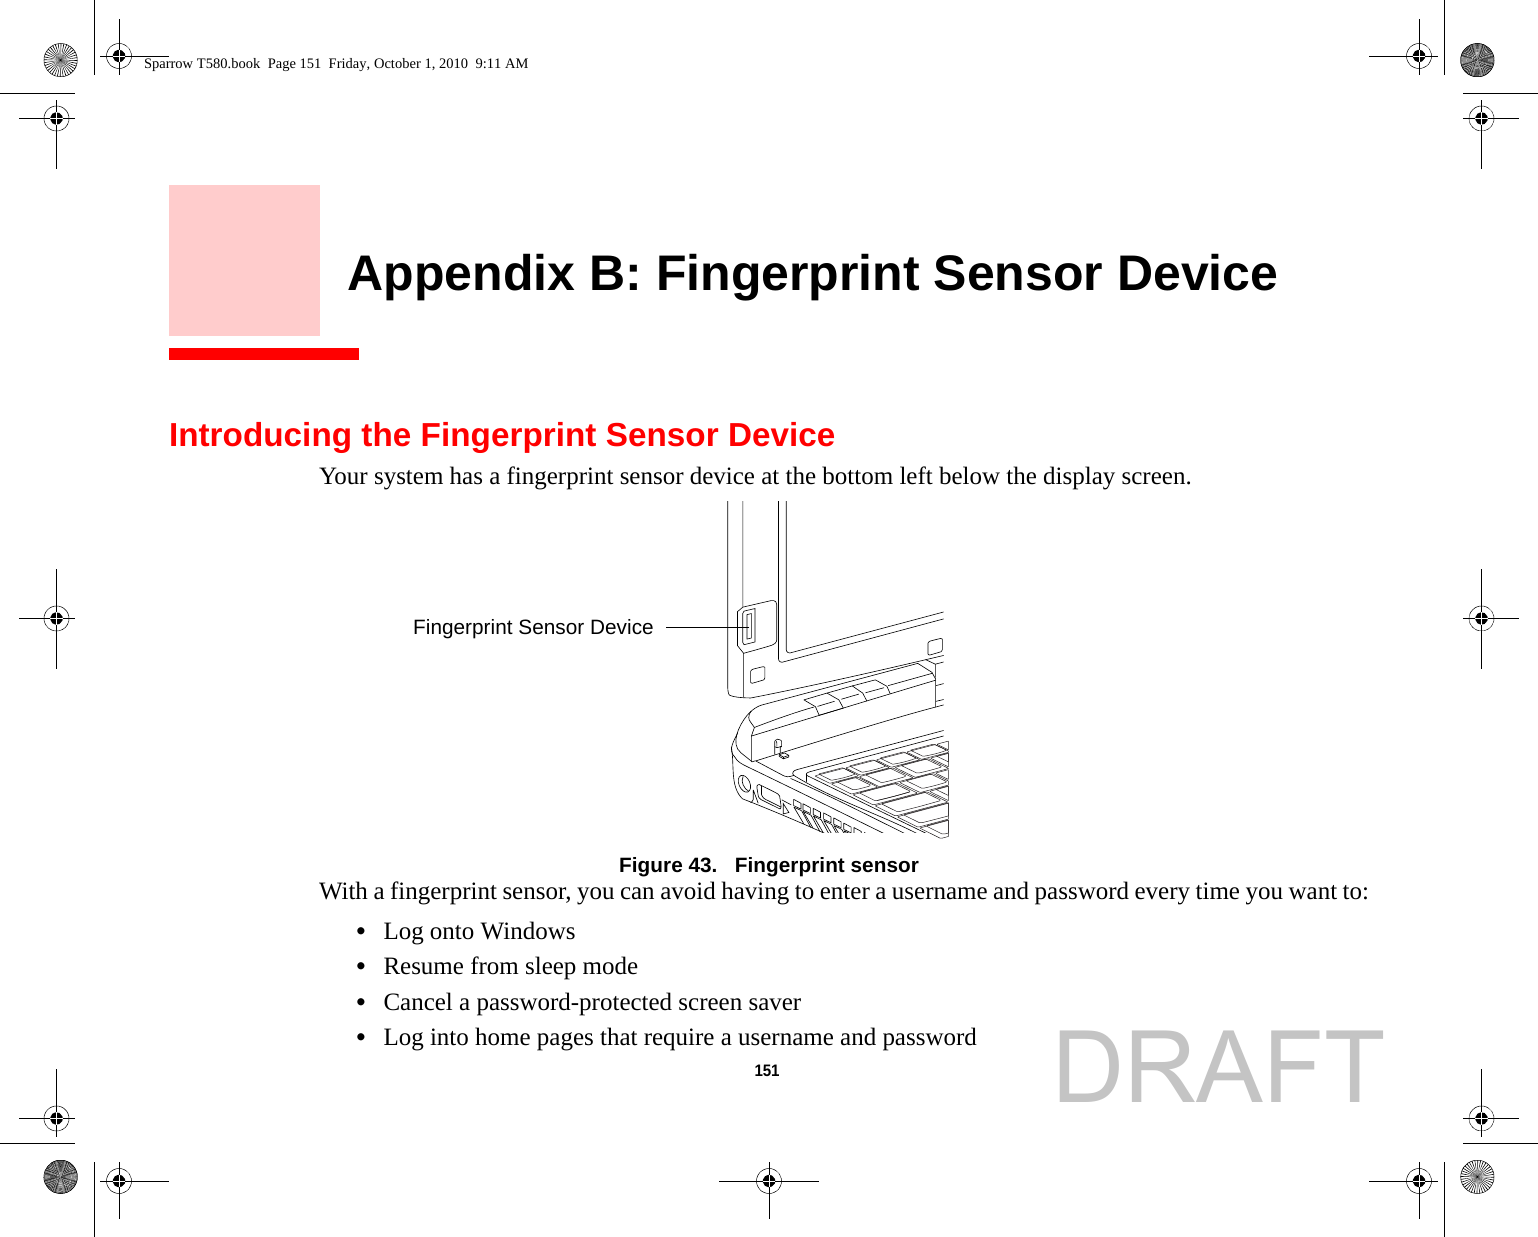 151     Appendix B: Fingerprint Sensor DeviceIntroducing the Fingerprint Sensor DeviceYour system has a fingerprint sensor device at the bottom left below the display screen. Figure 43.   Fingerprint sensorWith a fingerprint sensor, you can avoid having to enter a username and password every time you want to:•Log onto Windows•Resume from sleep mode•Cancel a password-protected screen saver•Log into home pages that require a username and passwordFingerprint Sensor DeviceSparrow T580.book  Page 151  Friday, October 1, 2010  9:11 AMDRAFT